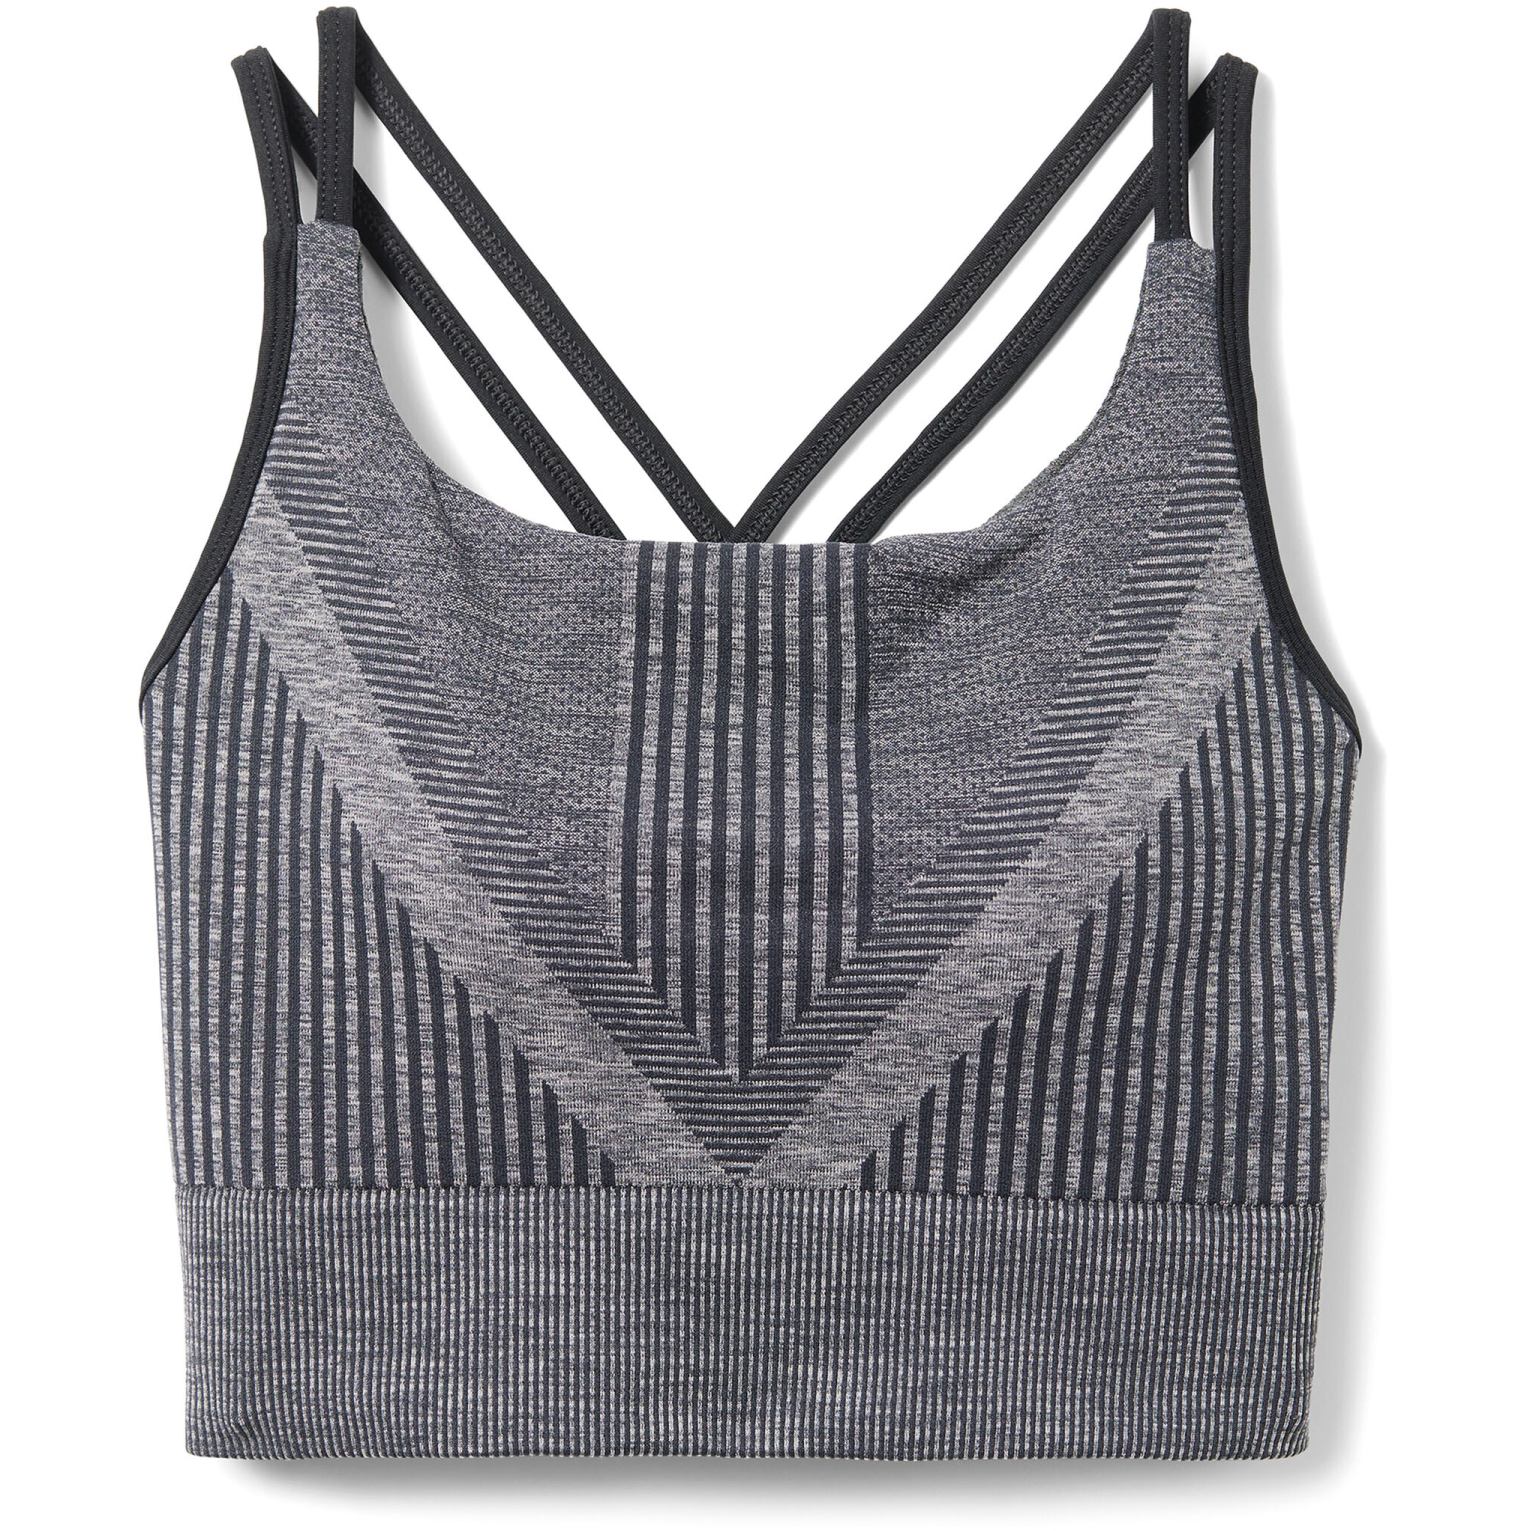 Productfoto van SmartWool Intraknit Strappy Dames Sport BH - A52 black heather